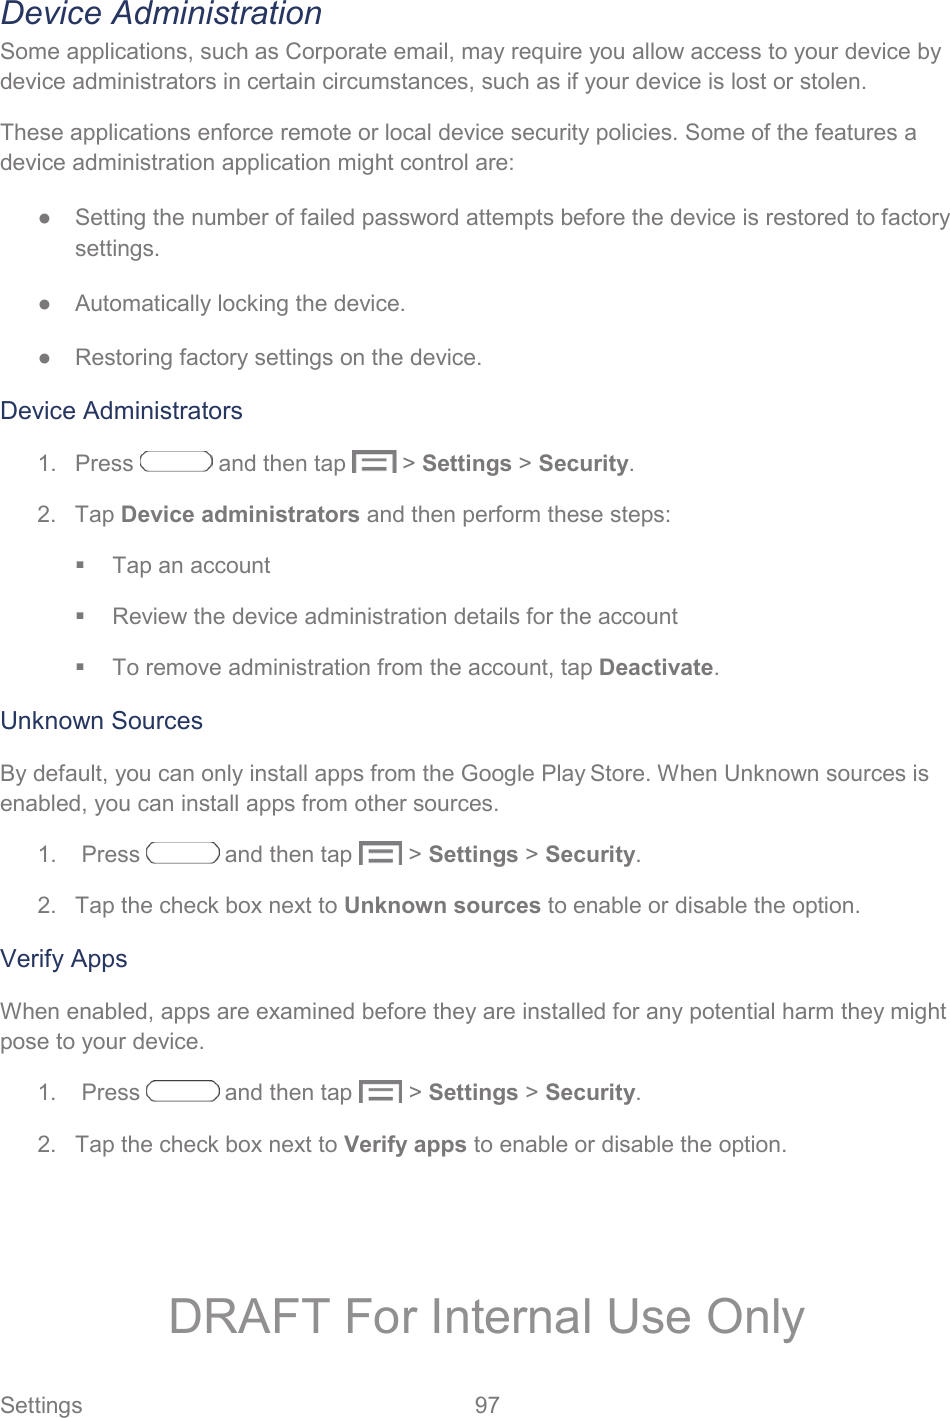  Settings  97   Device Administration Some applications, such as Corporate email, may require you allow access to your device by device administrators in certain circumstances, such as if your device is lost or stolen.  These applications enforce remote or local device security policies. Some of the features a device administration application might control are: ●  Setting the number of failed password attempts before the device is restored to factory settings. ●  Automatically locking the device. ●  Restoring factory settings on the device. Device Administrators 1.  Press   and then tap   &gt; Settings &gt; Security. 2. Tap Device administrators and then perform these steps:   Tap an account   Review the device administration details for the account   To remove administration from the account, tap Deactivate. Unknown Sources By default, you can only install apps from the Google Play Store. When Unknown sources is enabled, you can install apps from other sources. 1.   Press   and then tap   &gt; Settings &gt; Security. 2.  Tap the check box next to Unknown sources to enable or disable the option. Verify Apps When enabled, apps are examined before they are installed for any potential harm they might pose to your device.  1.   Press   and then tap   &gt; Settings &gt; Security. 2.  Tap the check box next to Verify apps to enable or disable the option. DRAFT For Internal Use Only